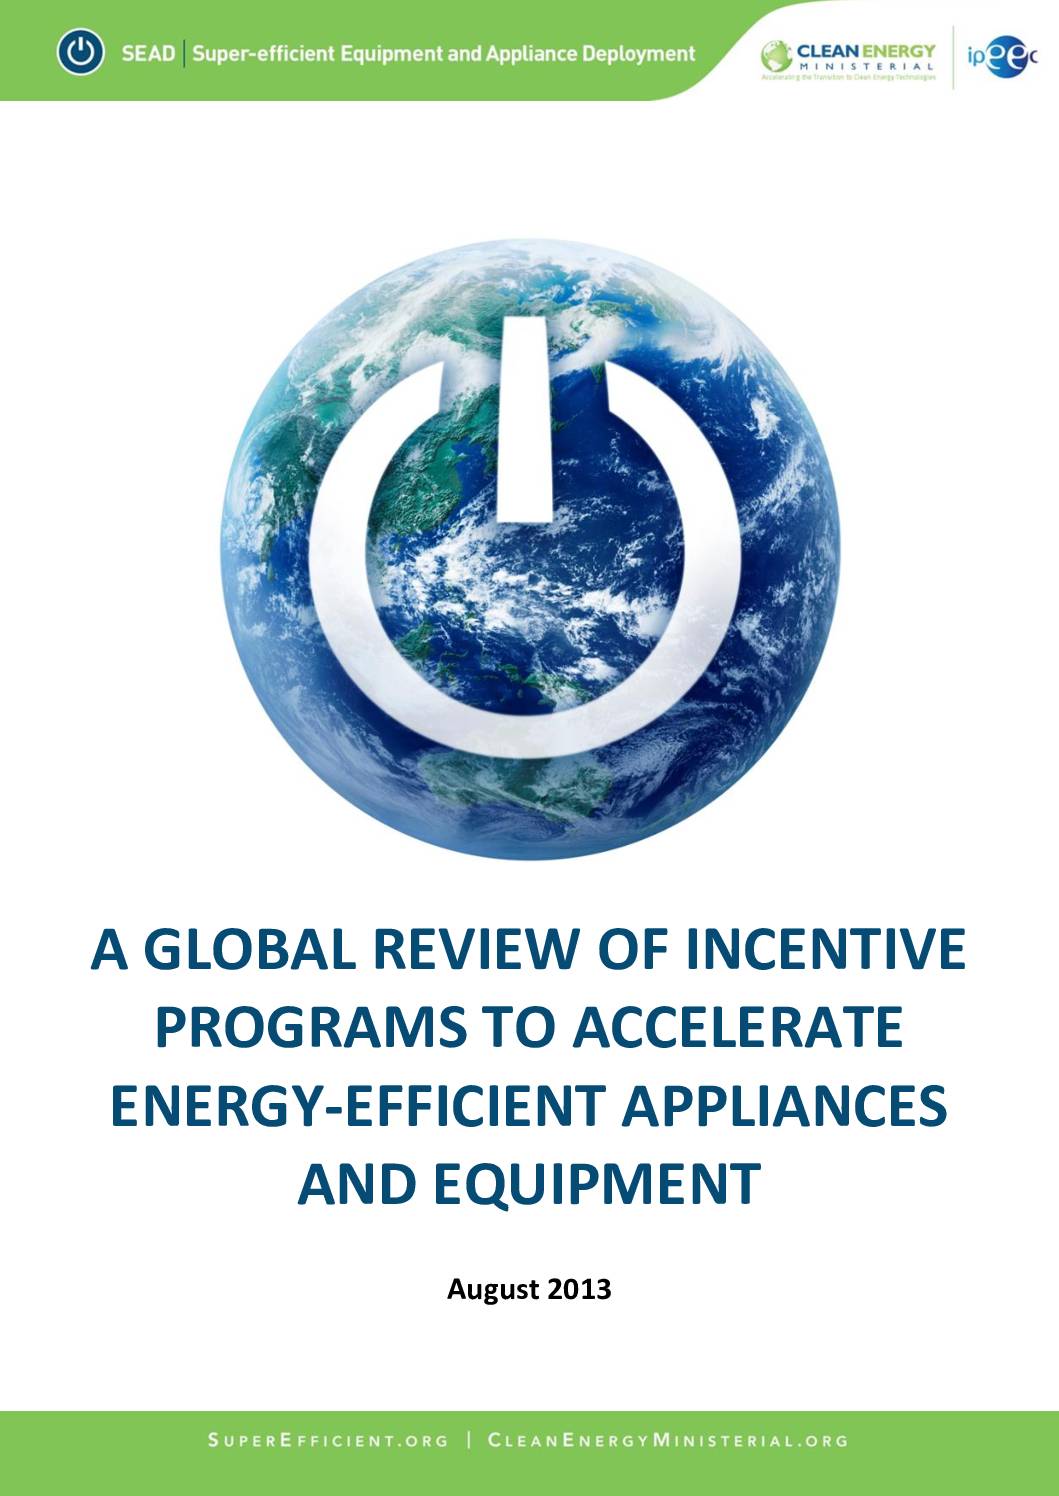 A Global Review of Incentive Programs to Accelerate Energy-Efficient Appliances and Equipment